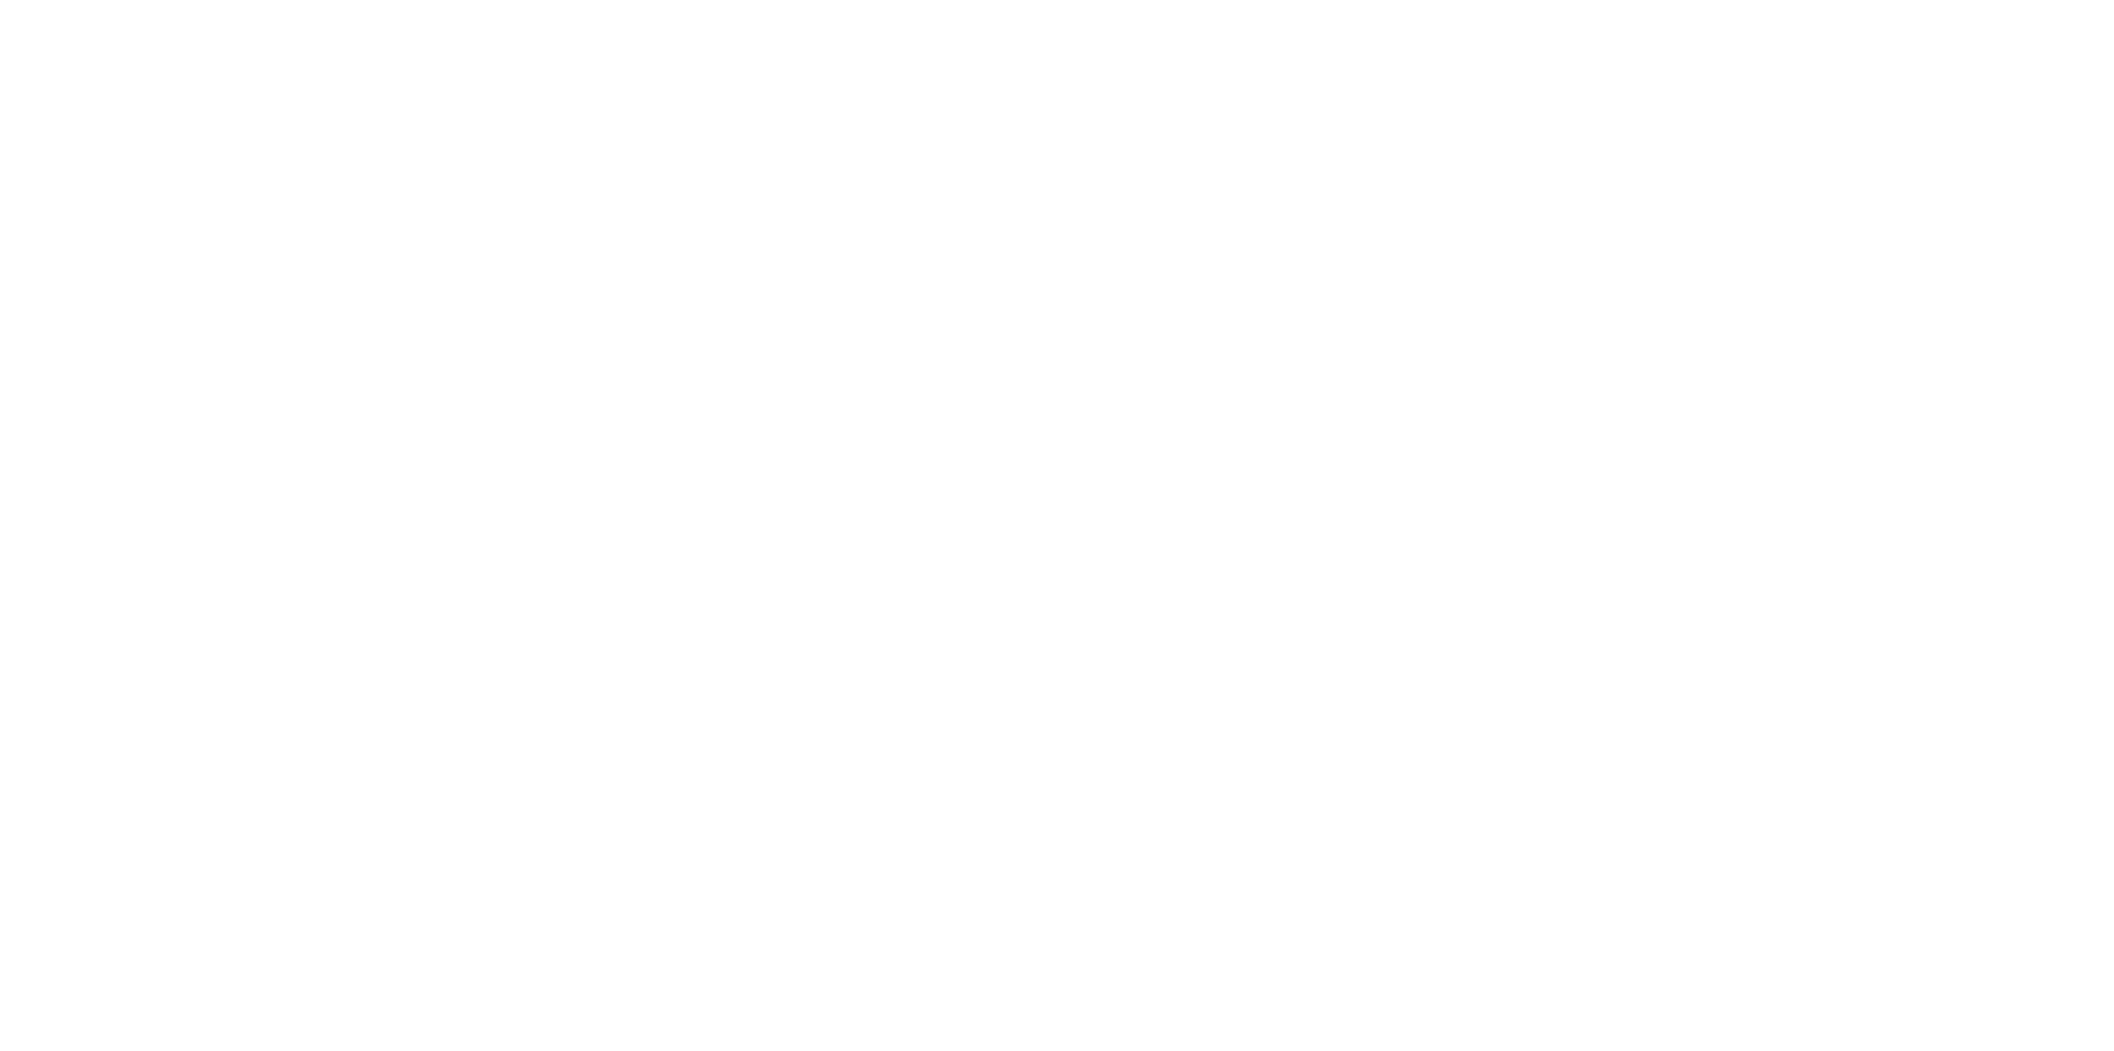 AIR - Advancing Evidence. Improving Lives.